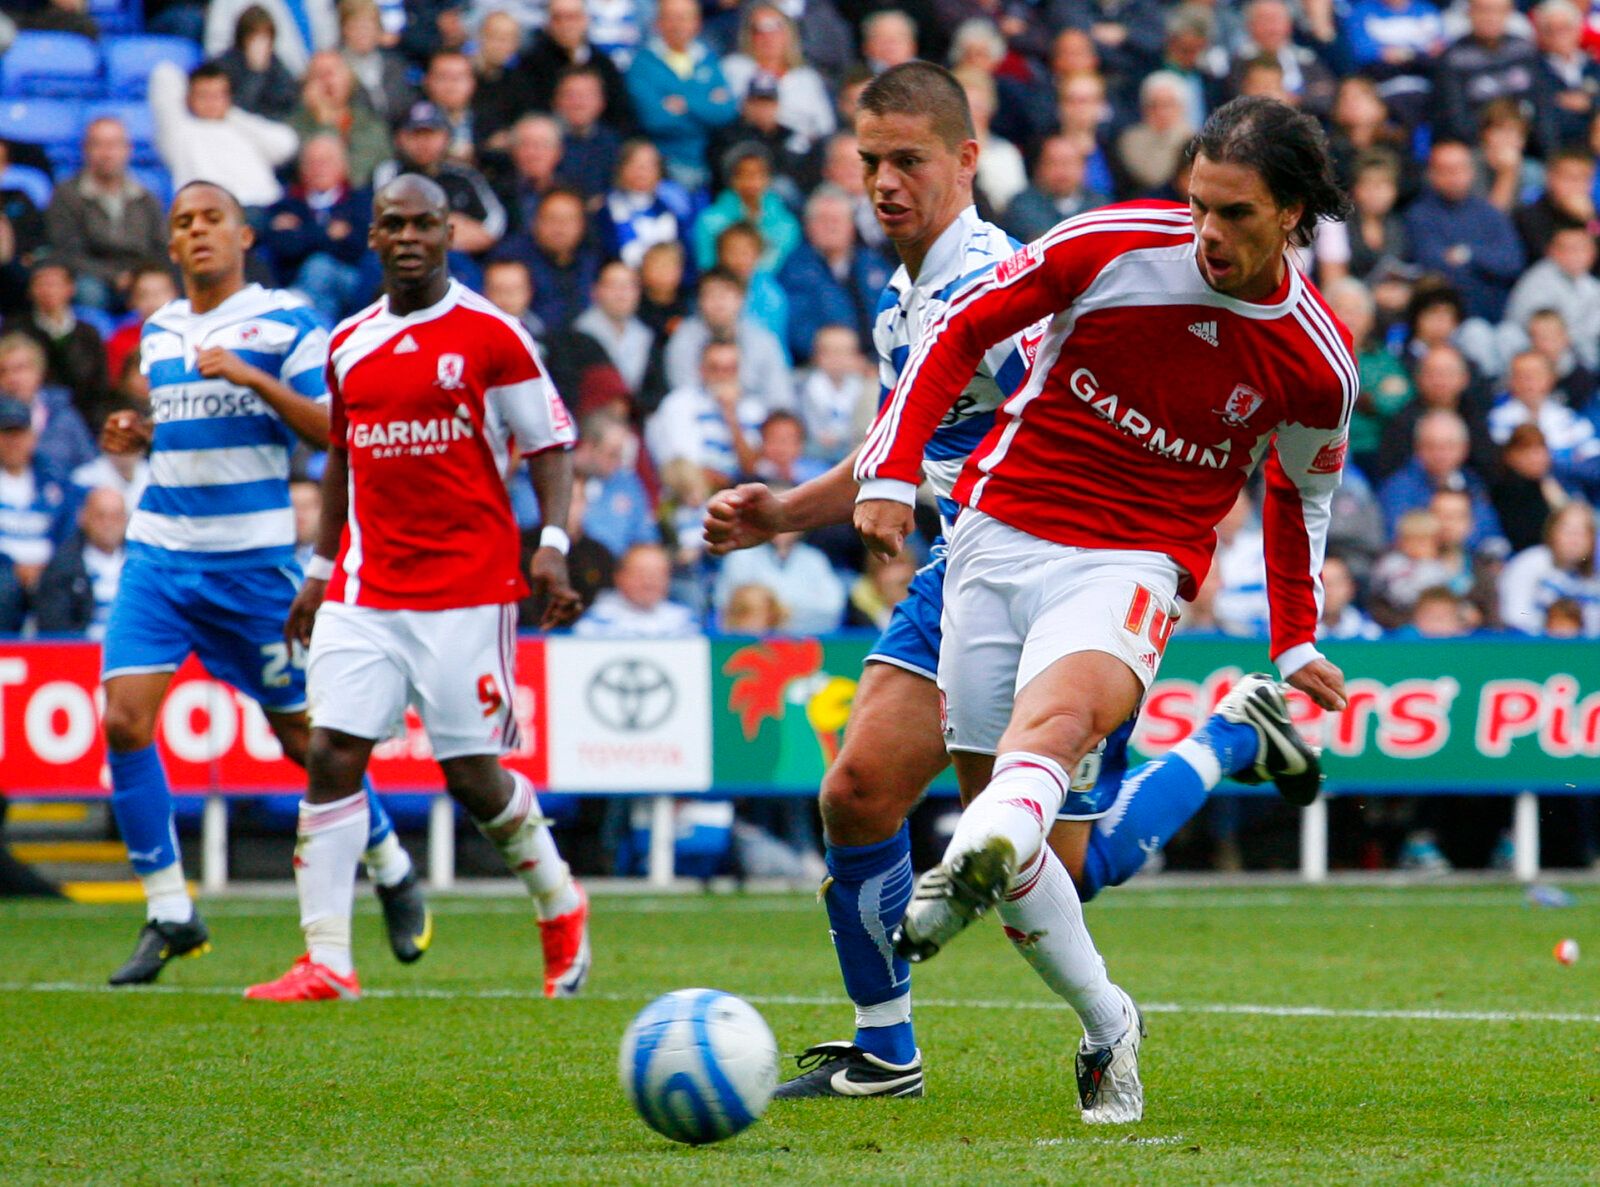 Football - Reading v Middlesbrough - Coca-Cola Football League Championship - The Madejski Stadium - 09/10 - 3/10/09 
Jeremie Aliadiere - Middlesbrough shoots at goal 
Mandatory Credit: Action Images / Andrew Couldridge